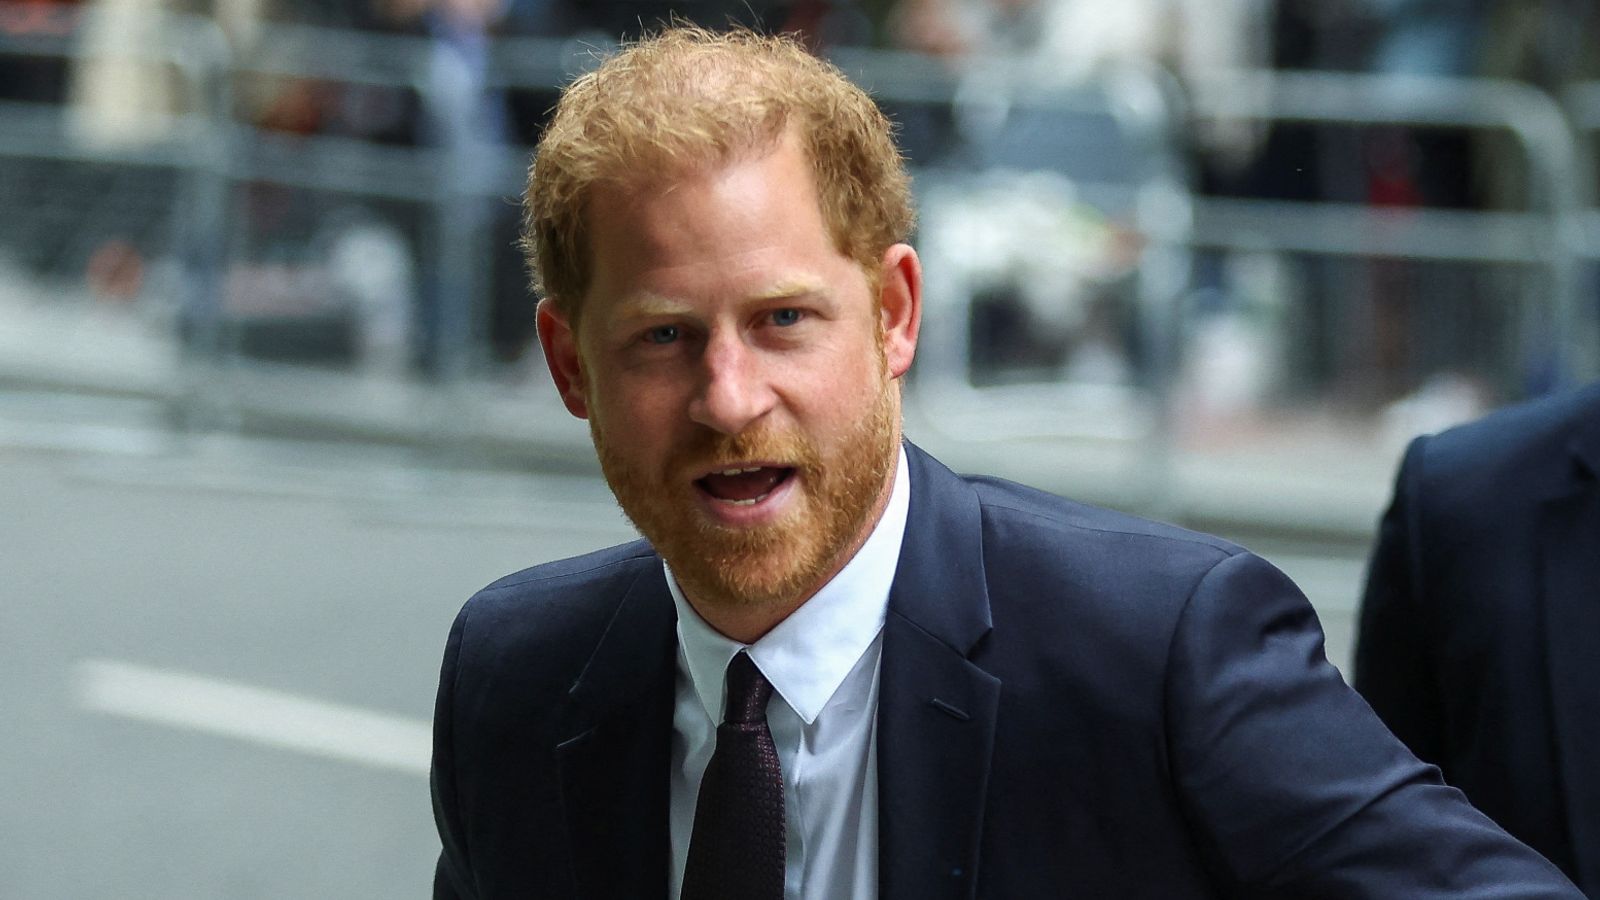 Prince Harry witness statement: Duke blames tabloids for 'inciting hatred' - and casting him as a 'thicko' and a 'playboy'